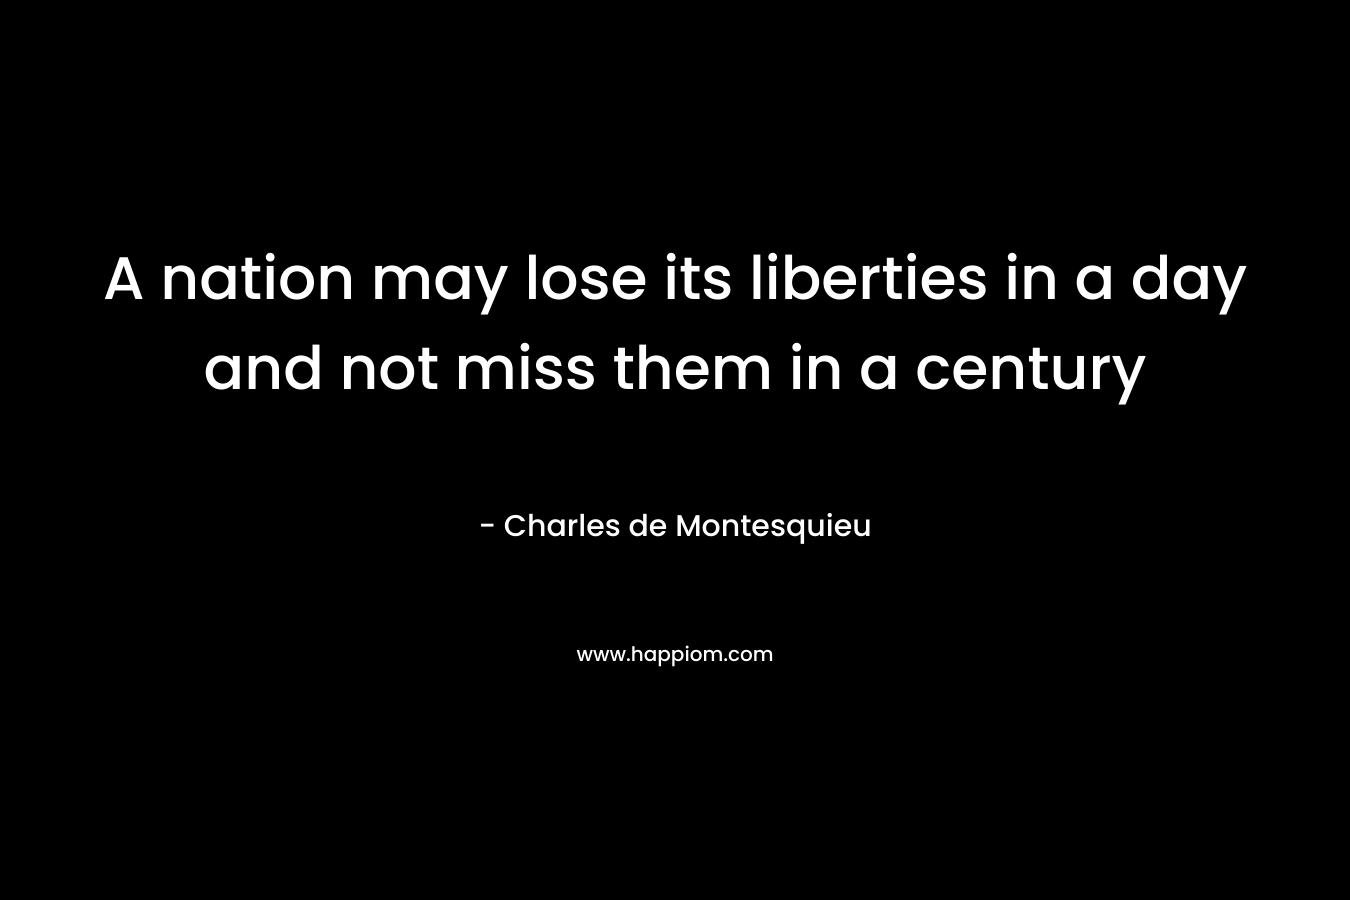 A nation may lose its liberties in a day and not miss them in a century